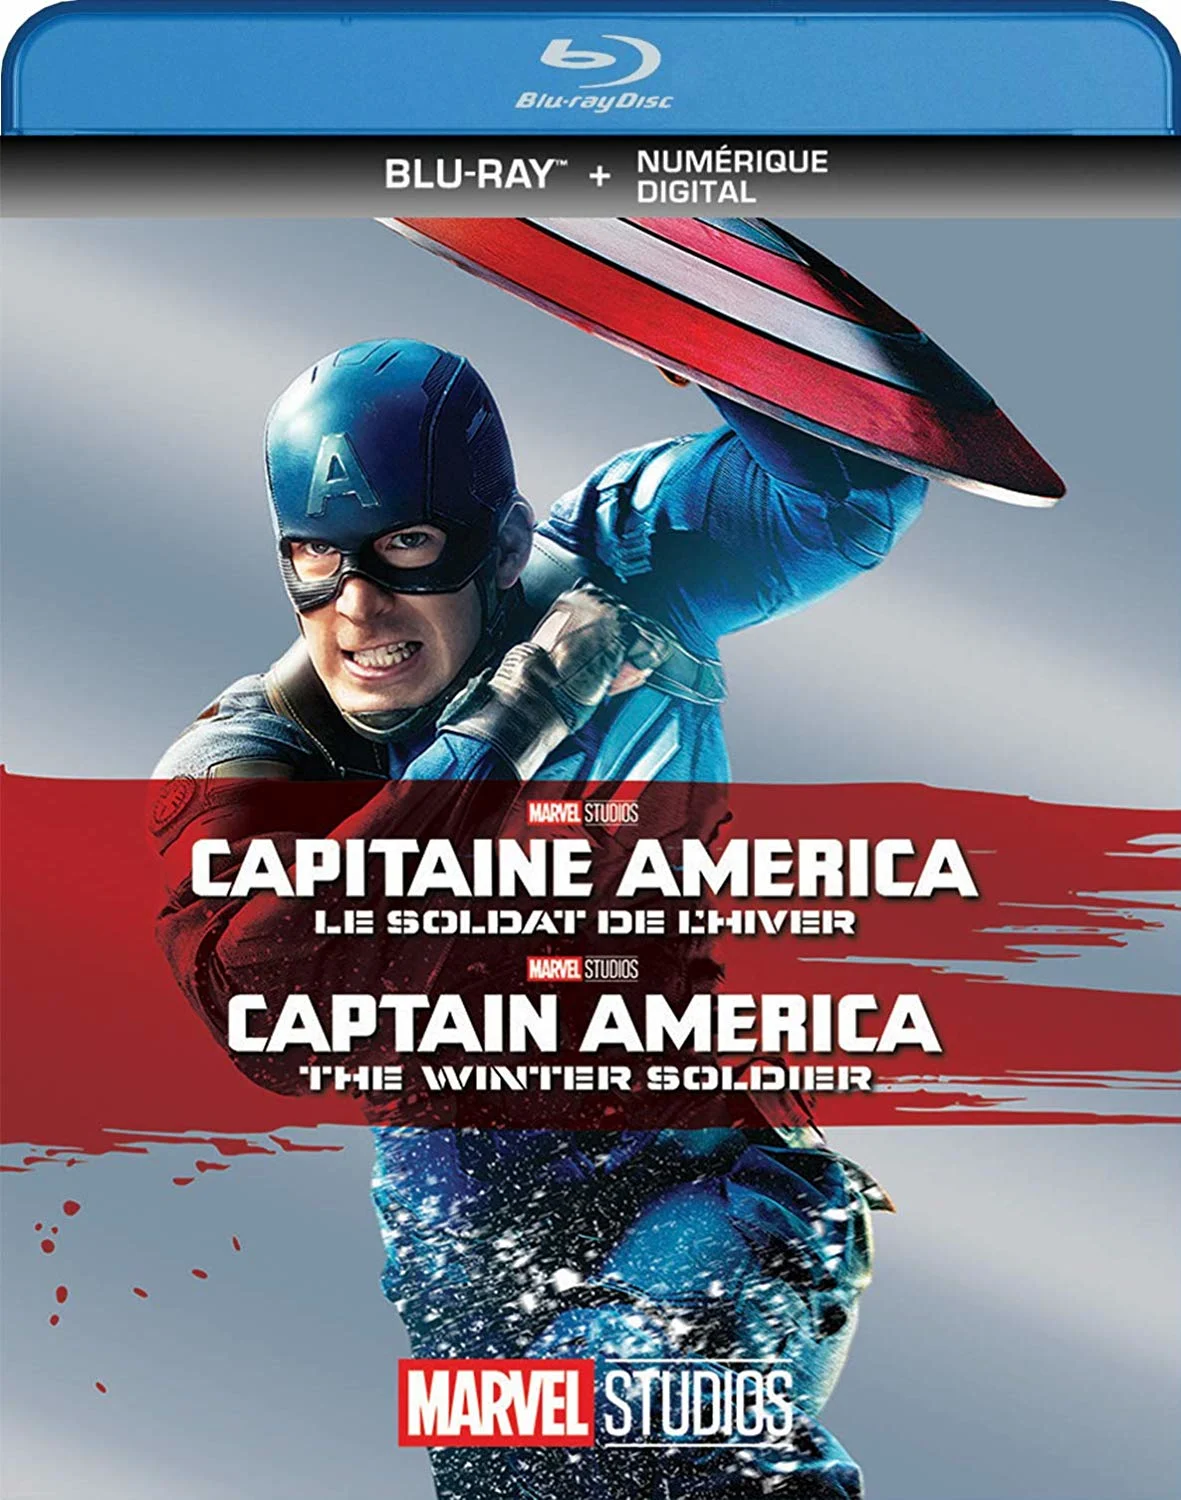 Captain America: The Winter Soldier (Blu-ray) on MovieShack